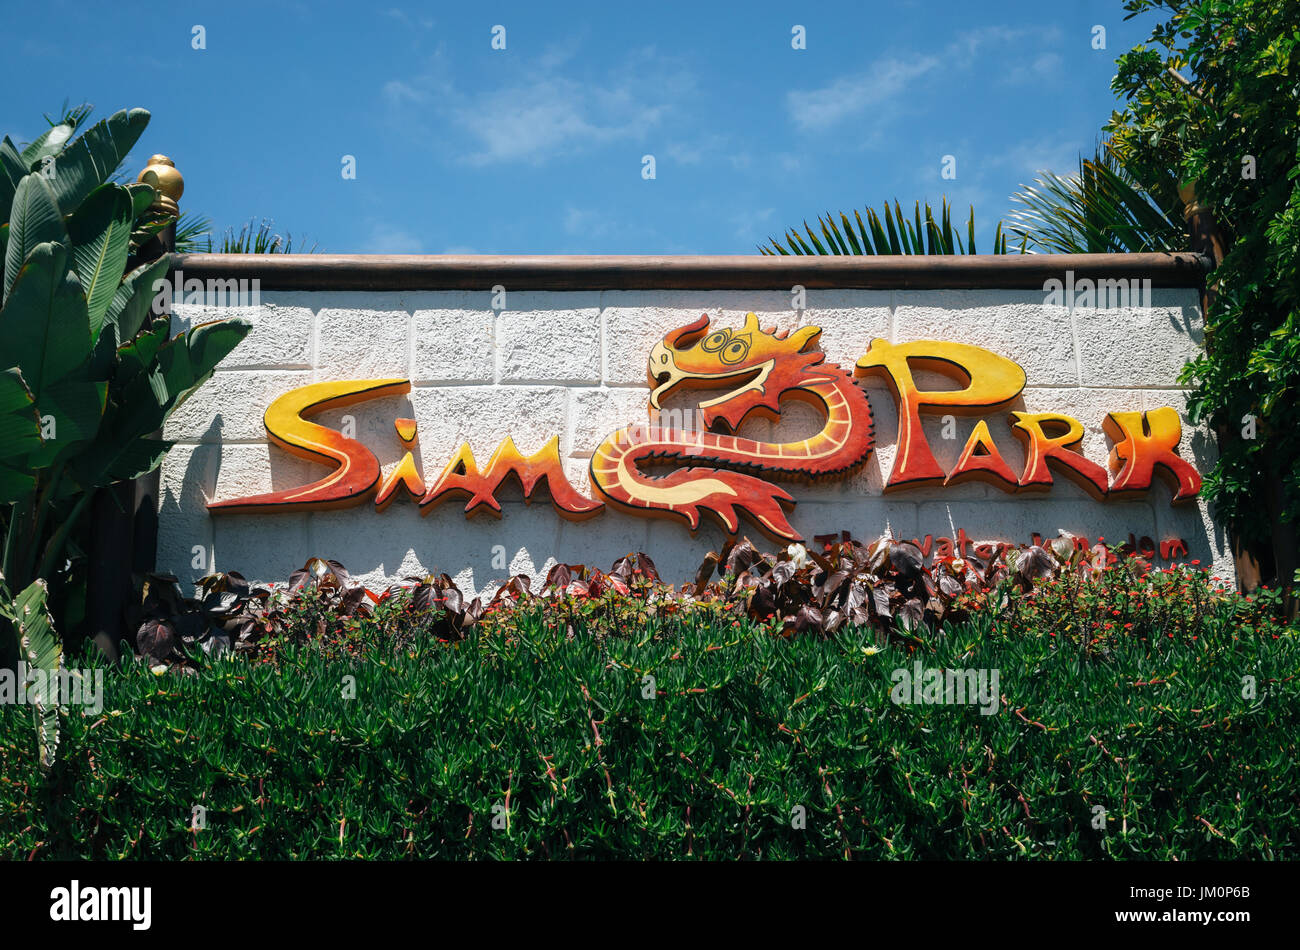 Costa Adeje, Tenerife, Spain - May 27, 2017: The Siam waterpark logo sign between a green plant in Tenerife, Spain. The Siam Park is the largest water Stock Photo